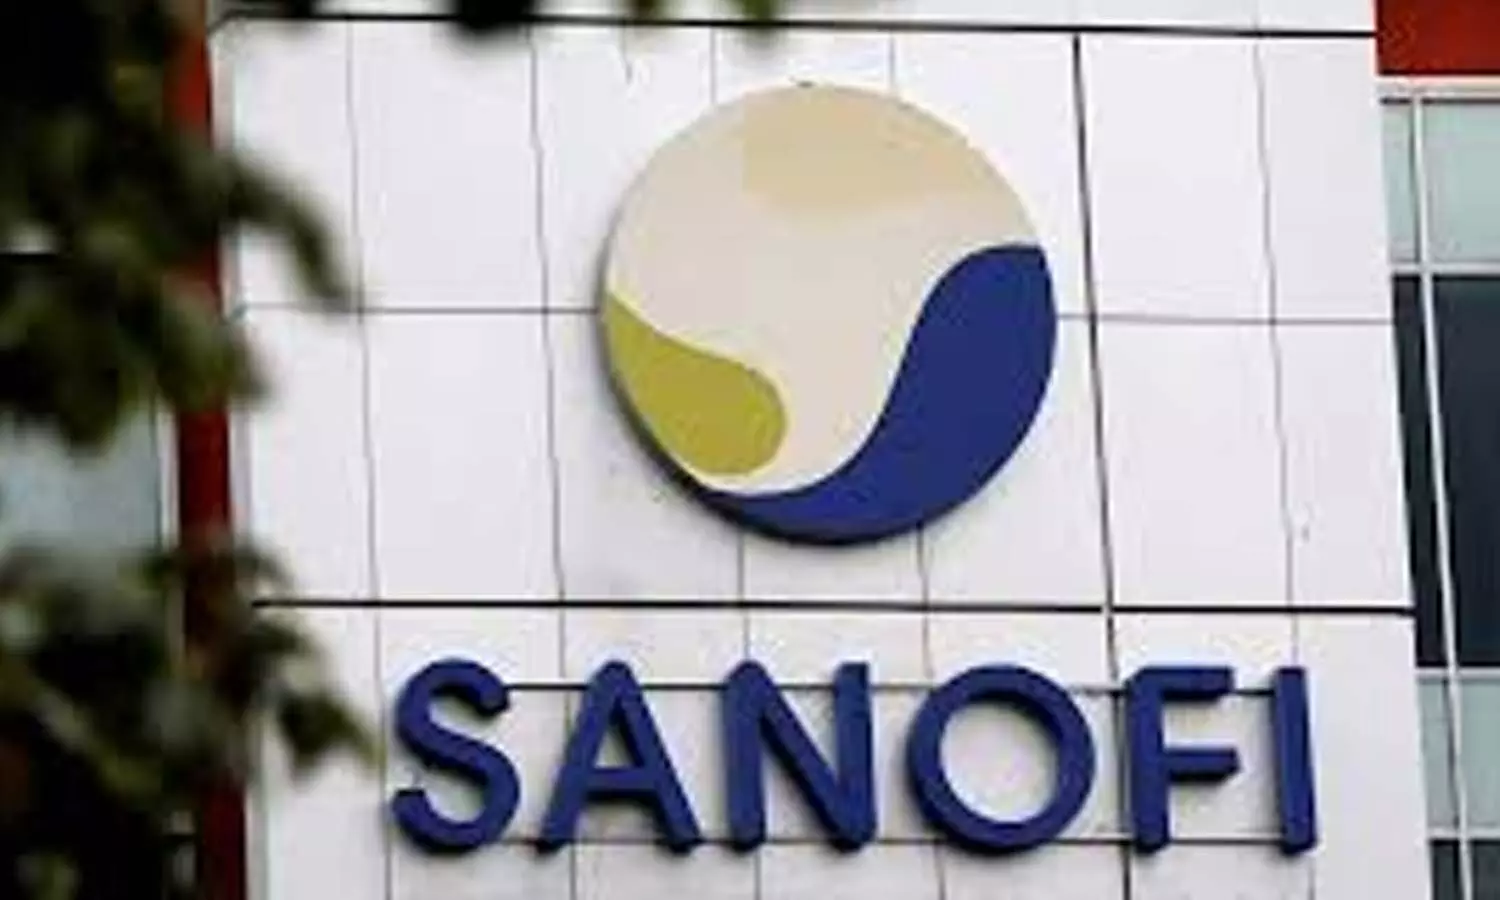 Sanofi wins second chemotherapy drug Taxotere bellwether trial verdict